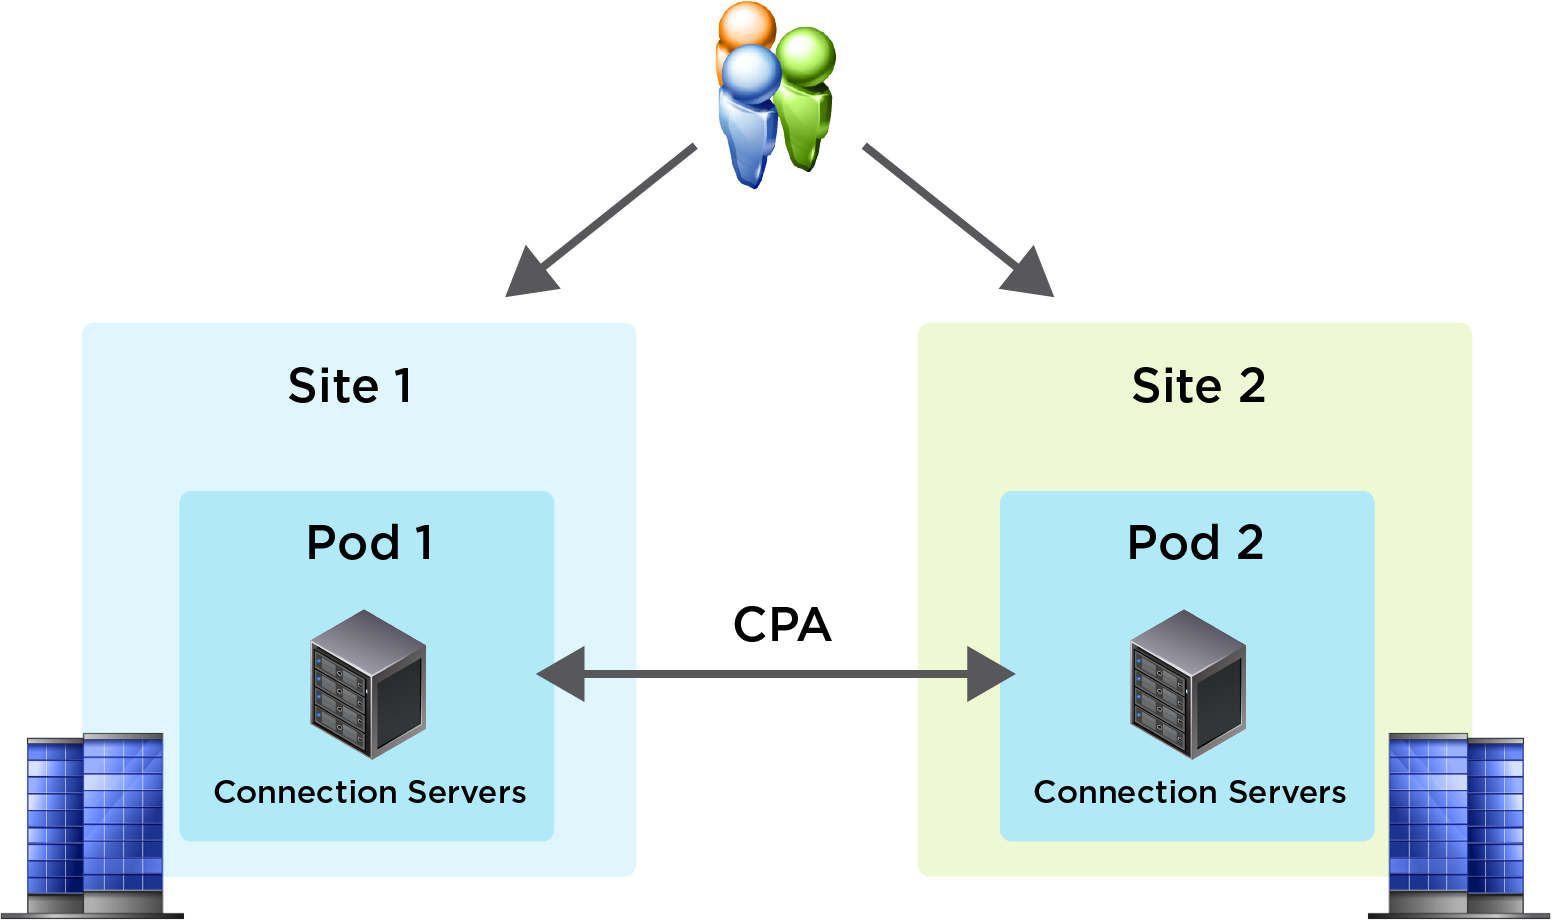 A diagram of a cpa

Description automatically generated with low confidence